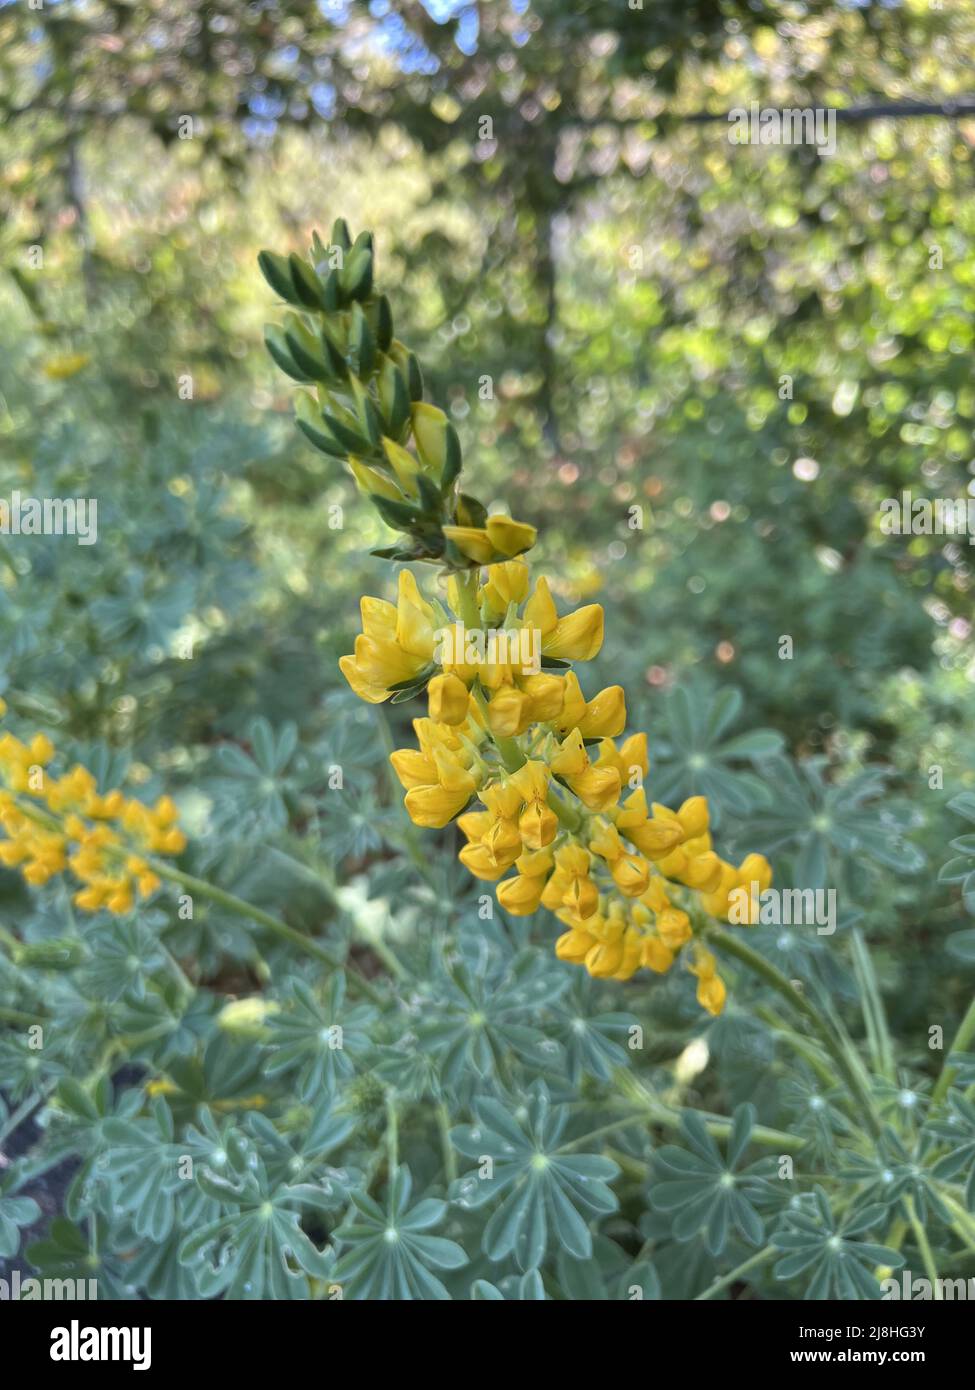 Close-up of yellow flowers of a Chick Lupine (Lupinus microcarpus var densiflorus) plant in Lafayette, California, April 15, 2022. Photo courtesy Sftm. Stock Photo